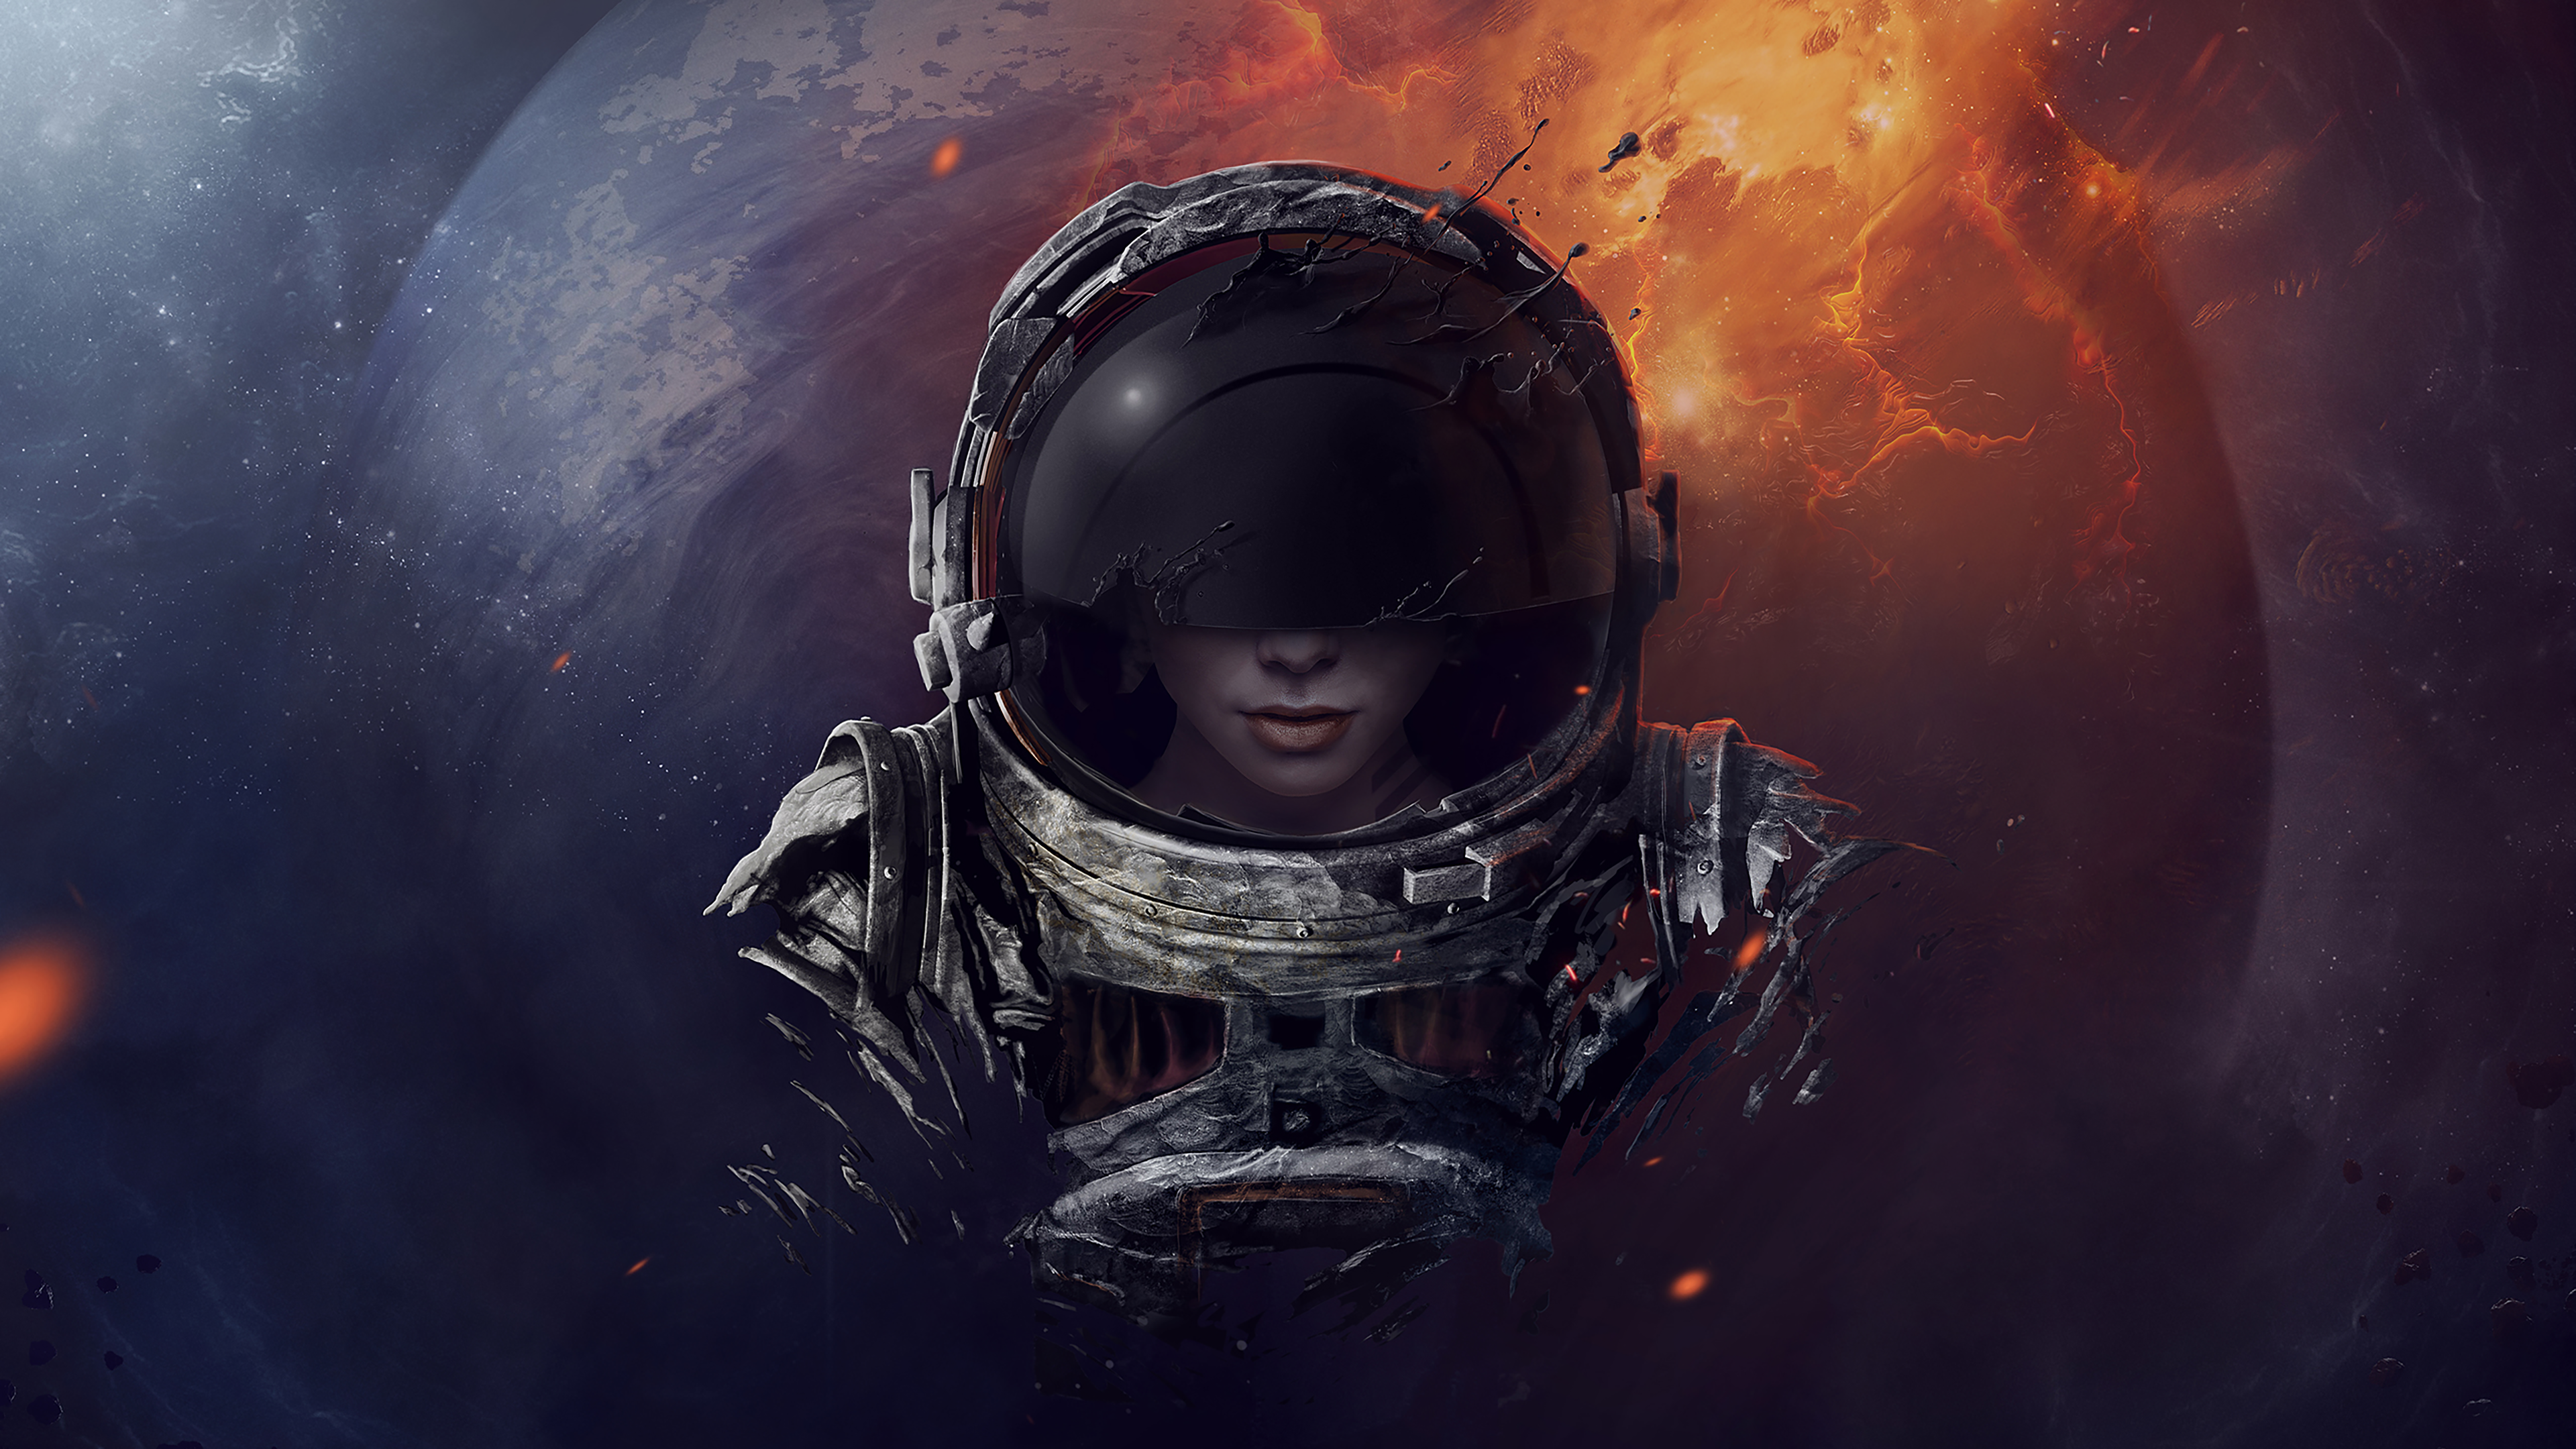 General 3840x2160 astronaut space fantasy art planet spacesuit abstract surreal digital art drawing helmet space art futuristic science fiction women science fiction artwork fictional character women frontal view visors